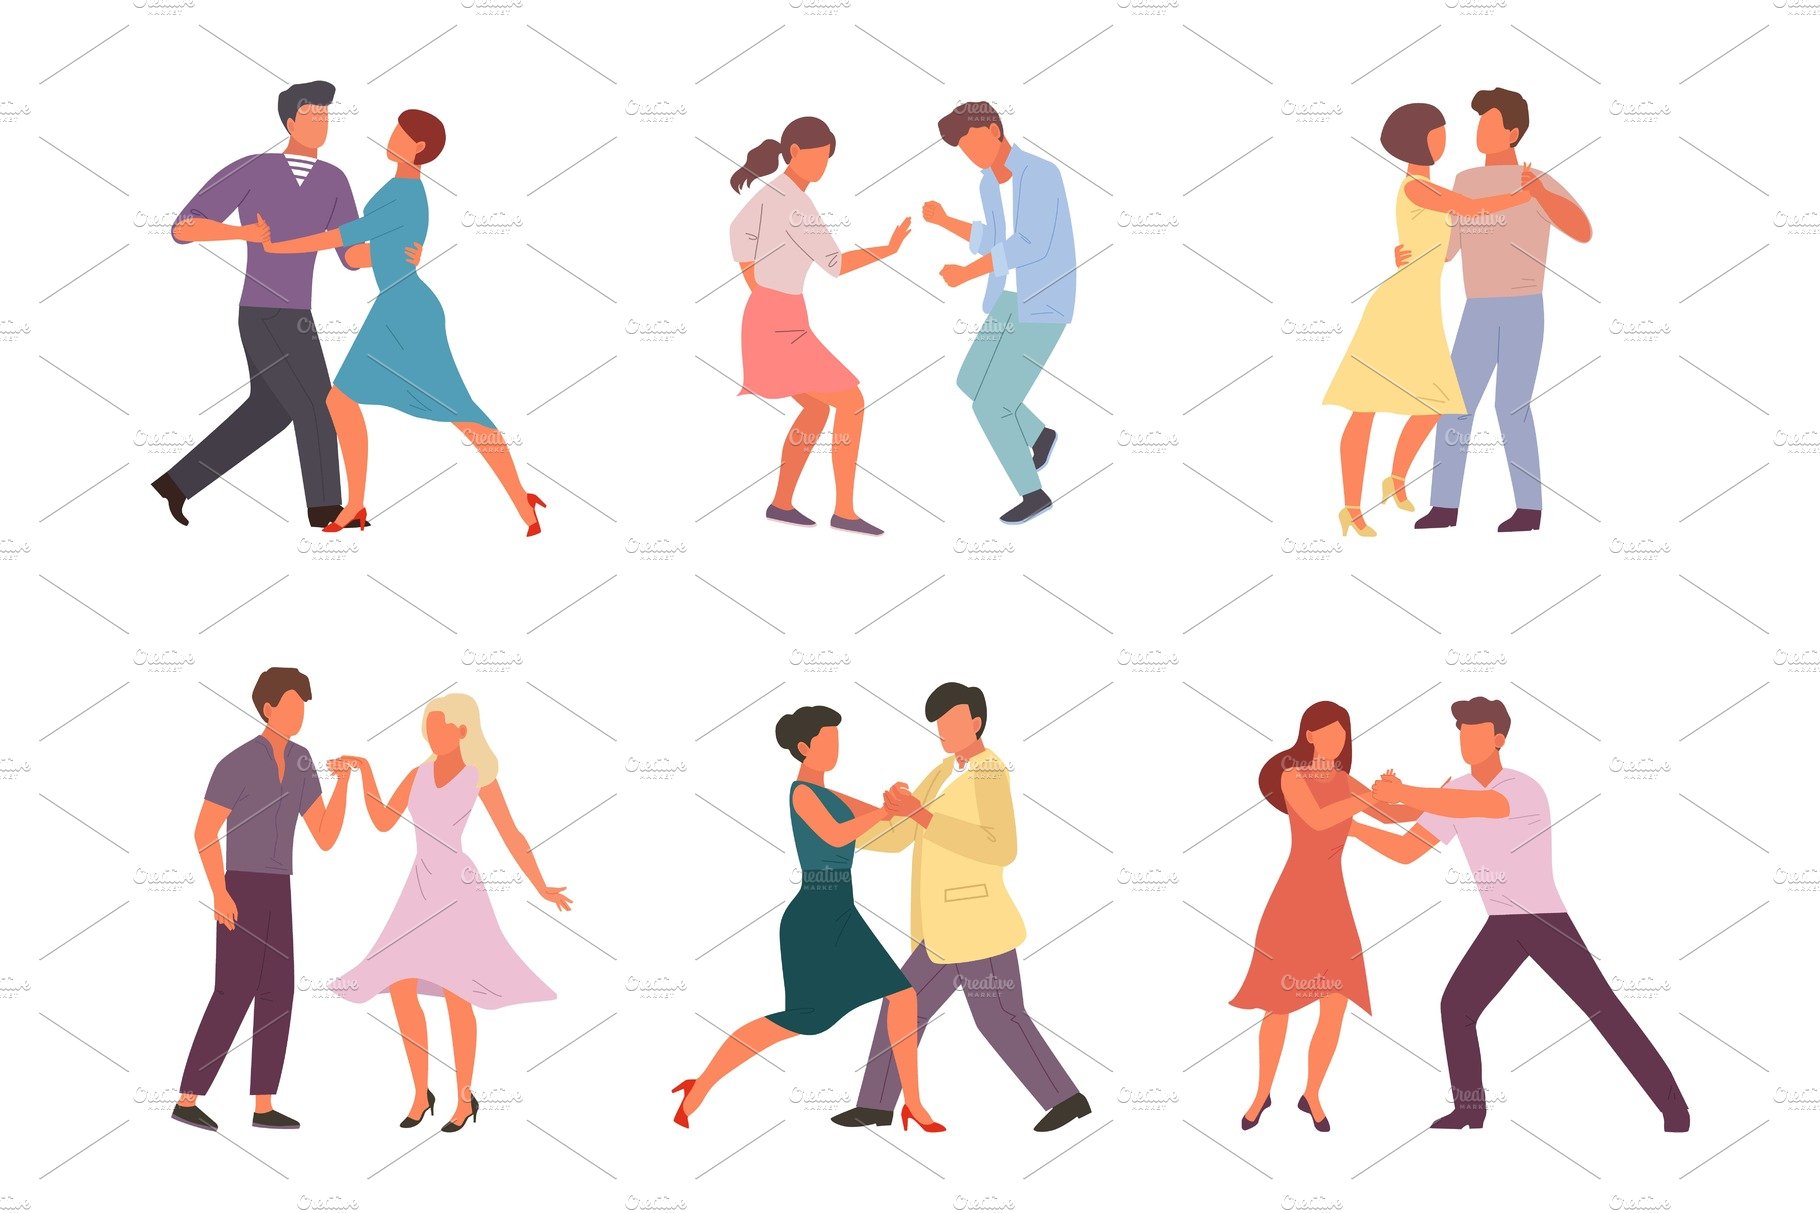 People dancing in pairs set. Stylish cover image.